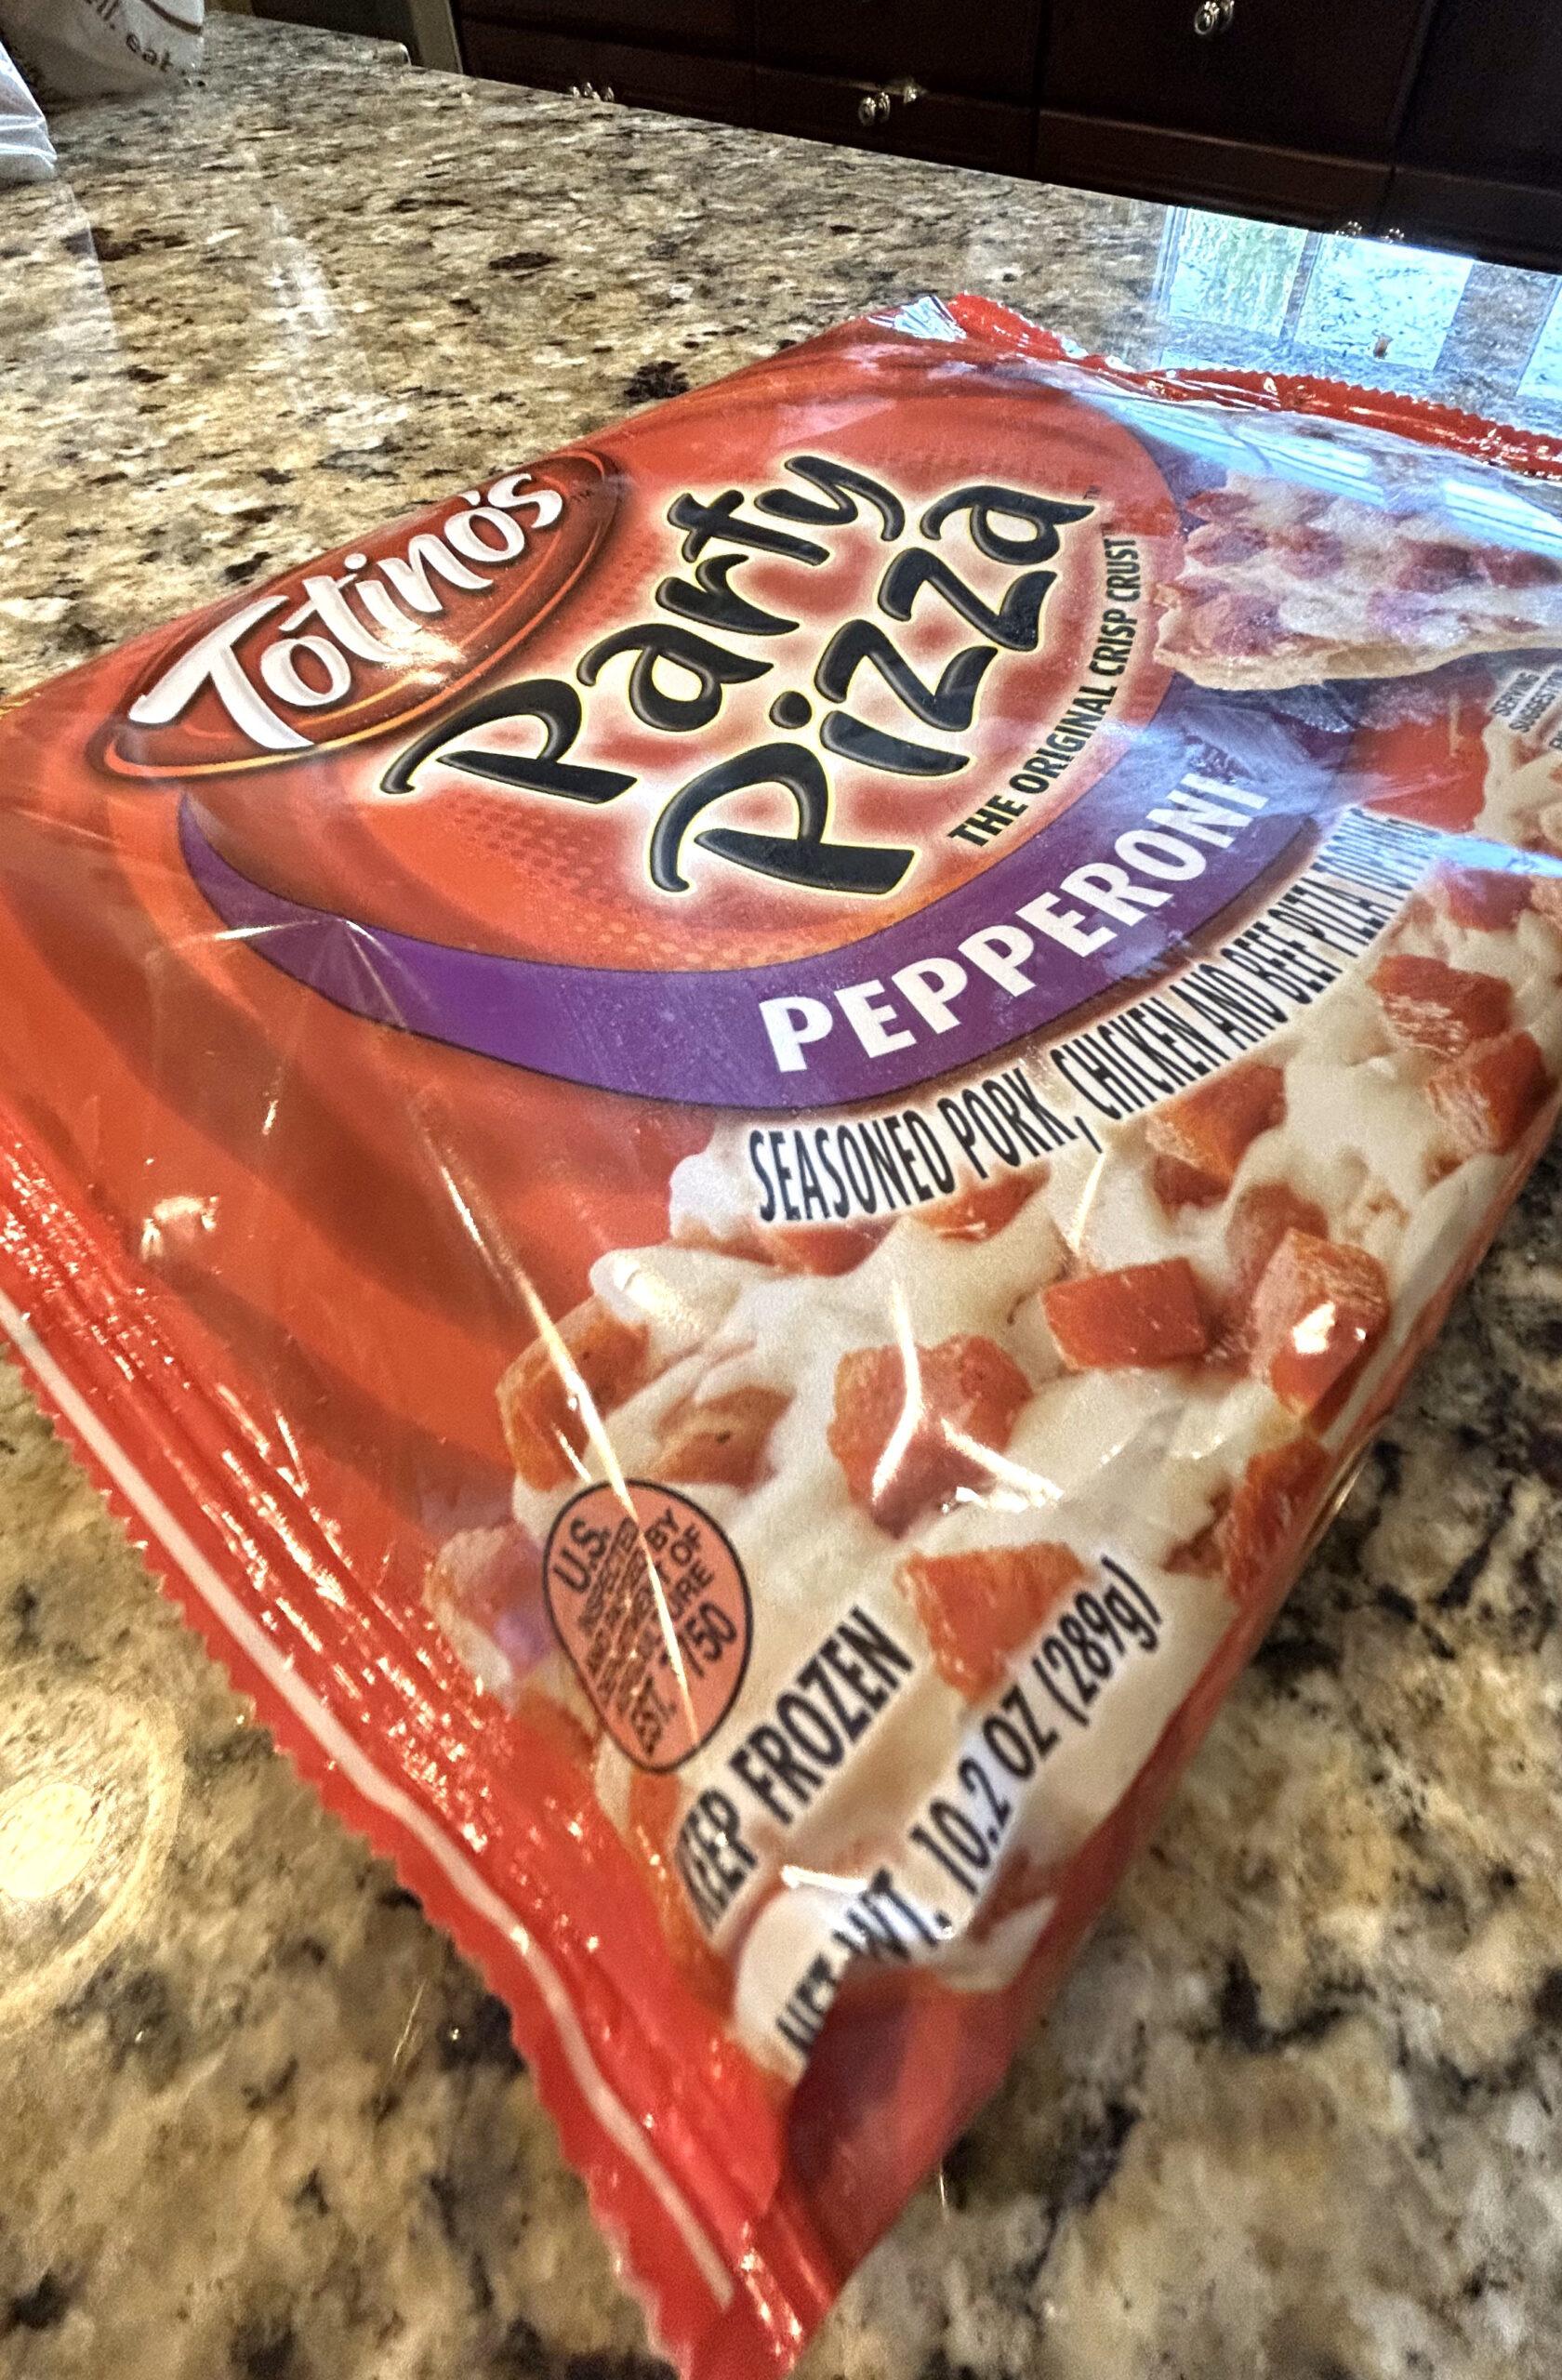 Totinos party pizza